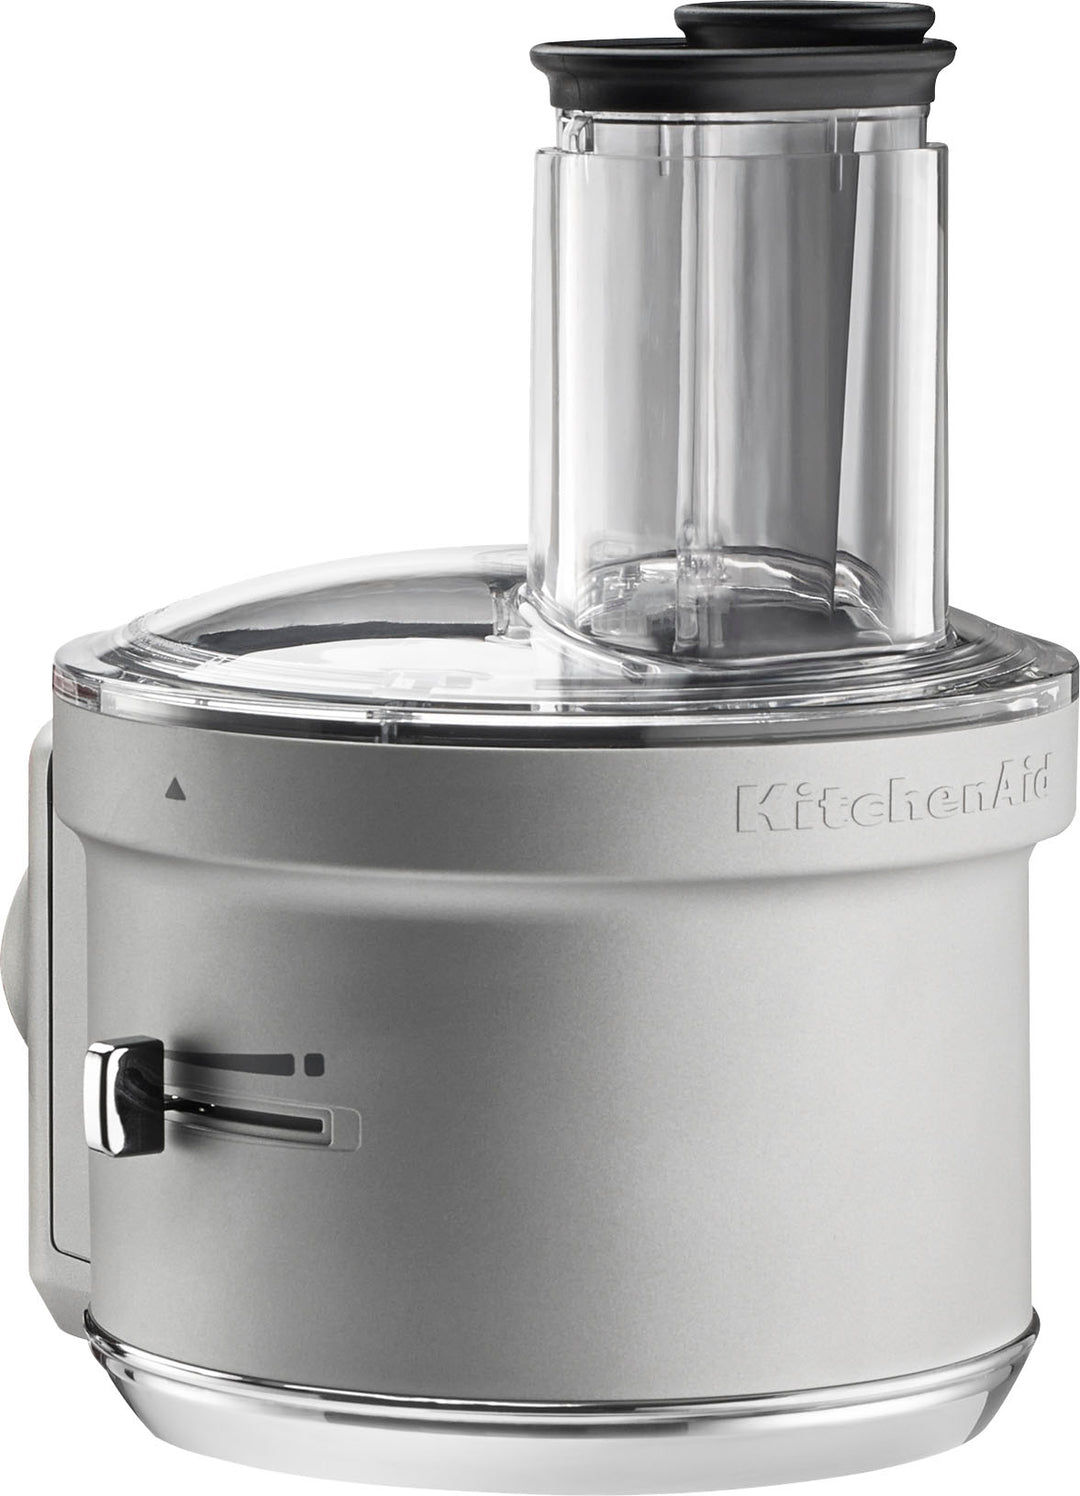 KitchenAid - KSM2FPA Food Processor Attachment Kit with Commercial Style Dicing - Silver_11